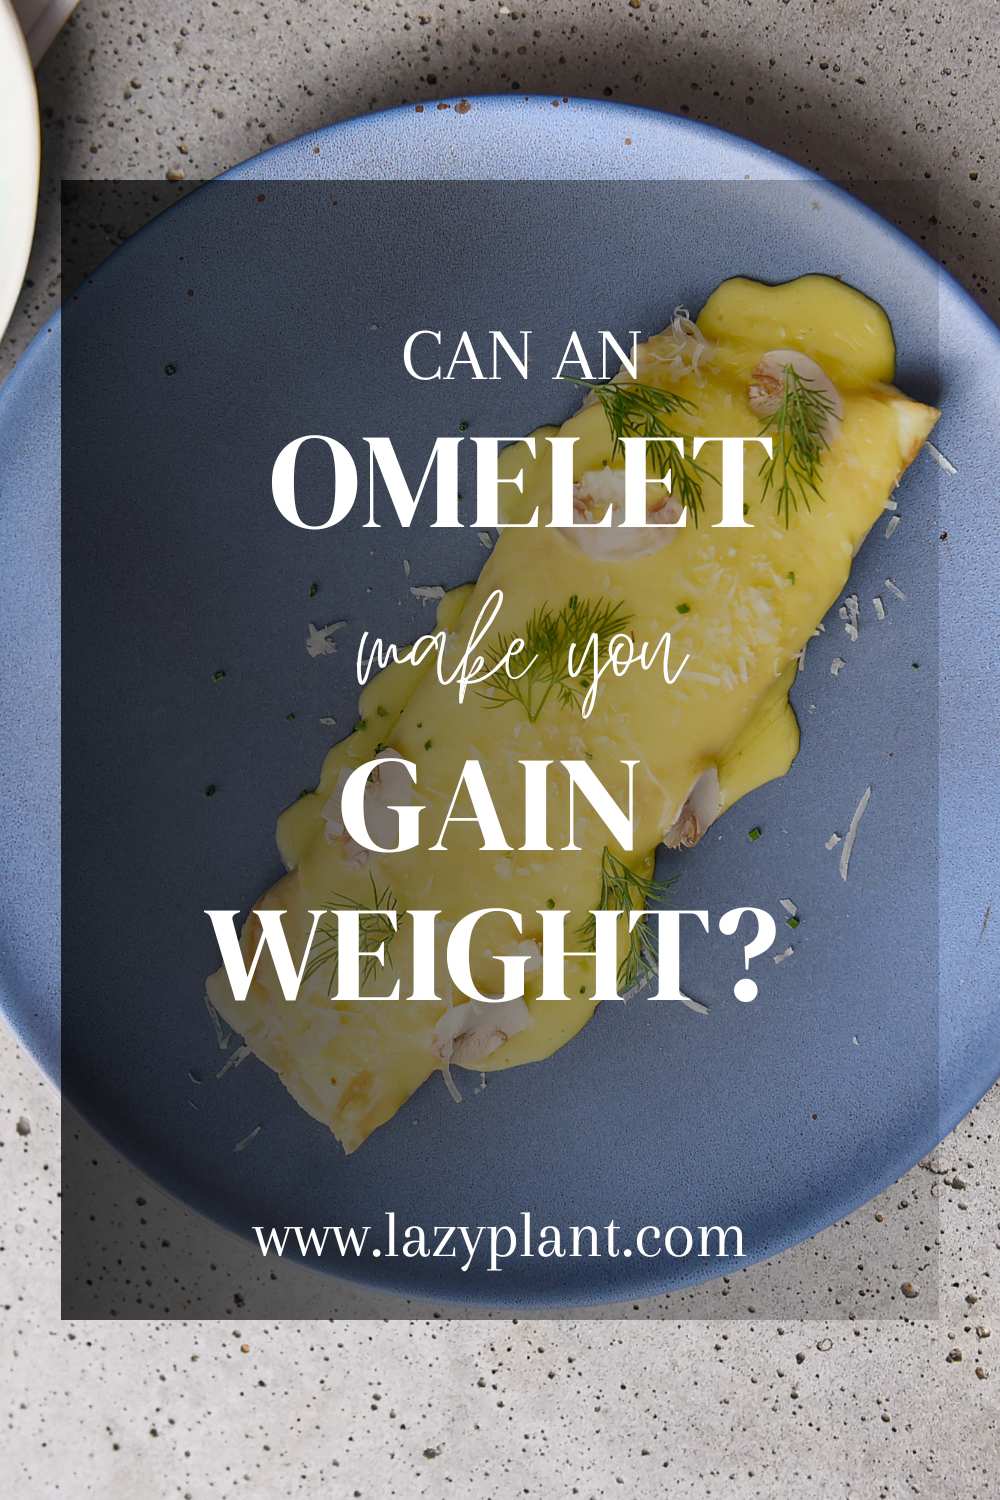 Consuming omelets can lead to weight gain as they contain high-calorie ingredients.